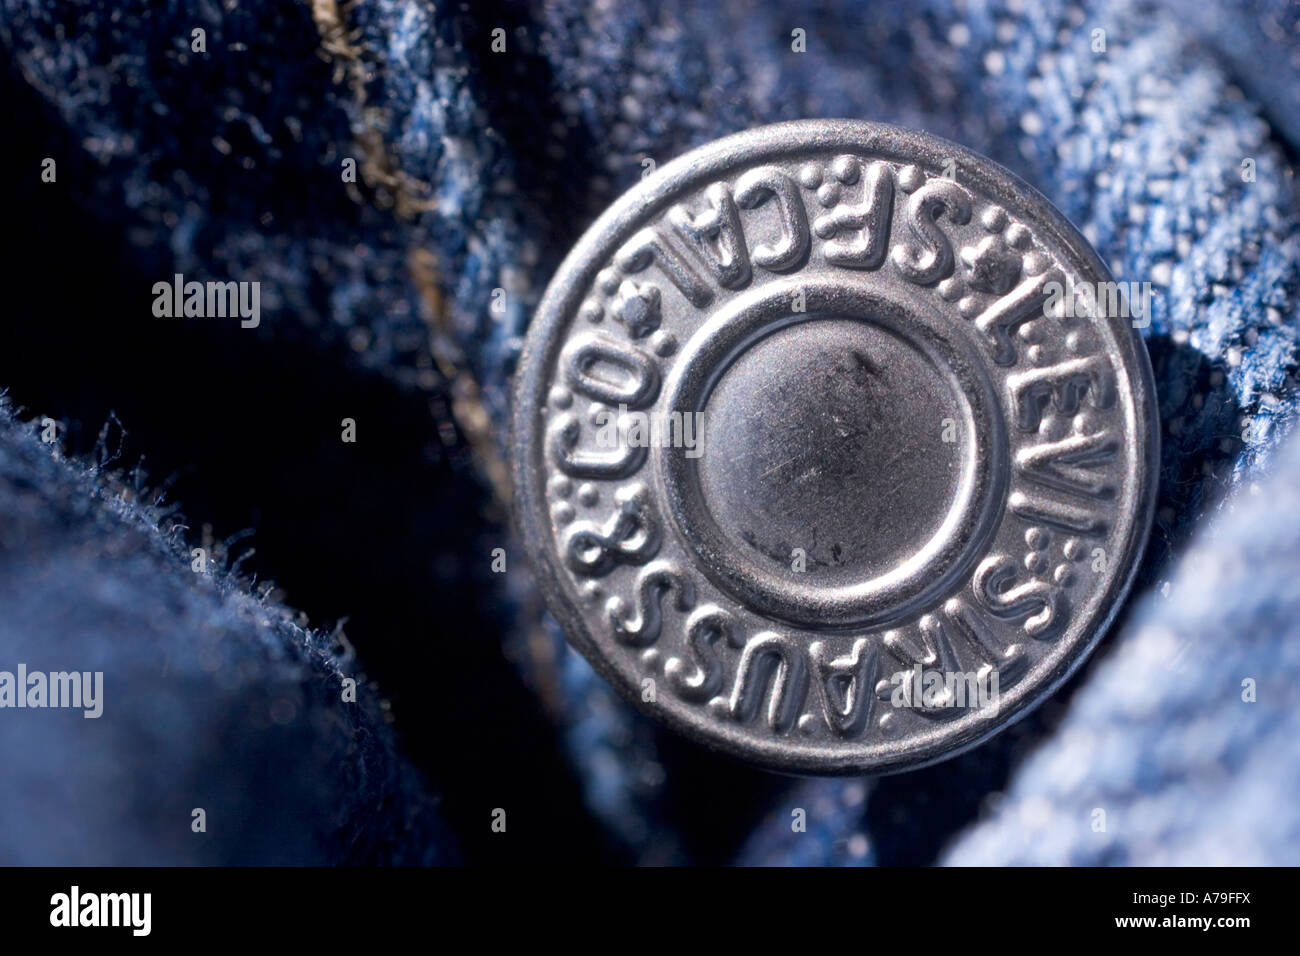 Levi jeans 501 501 s detail with close up of fly button Stock Photo - Alamy